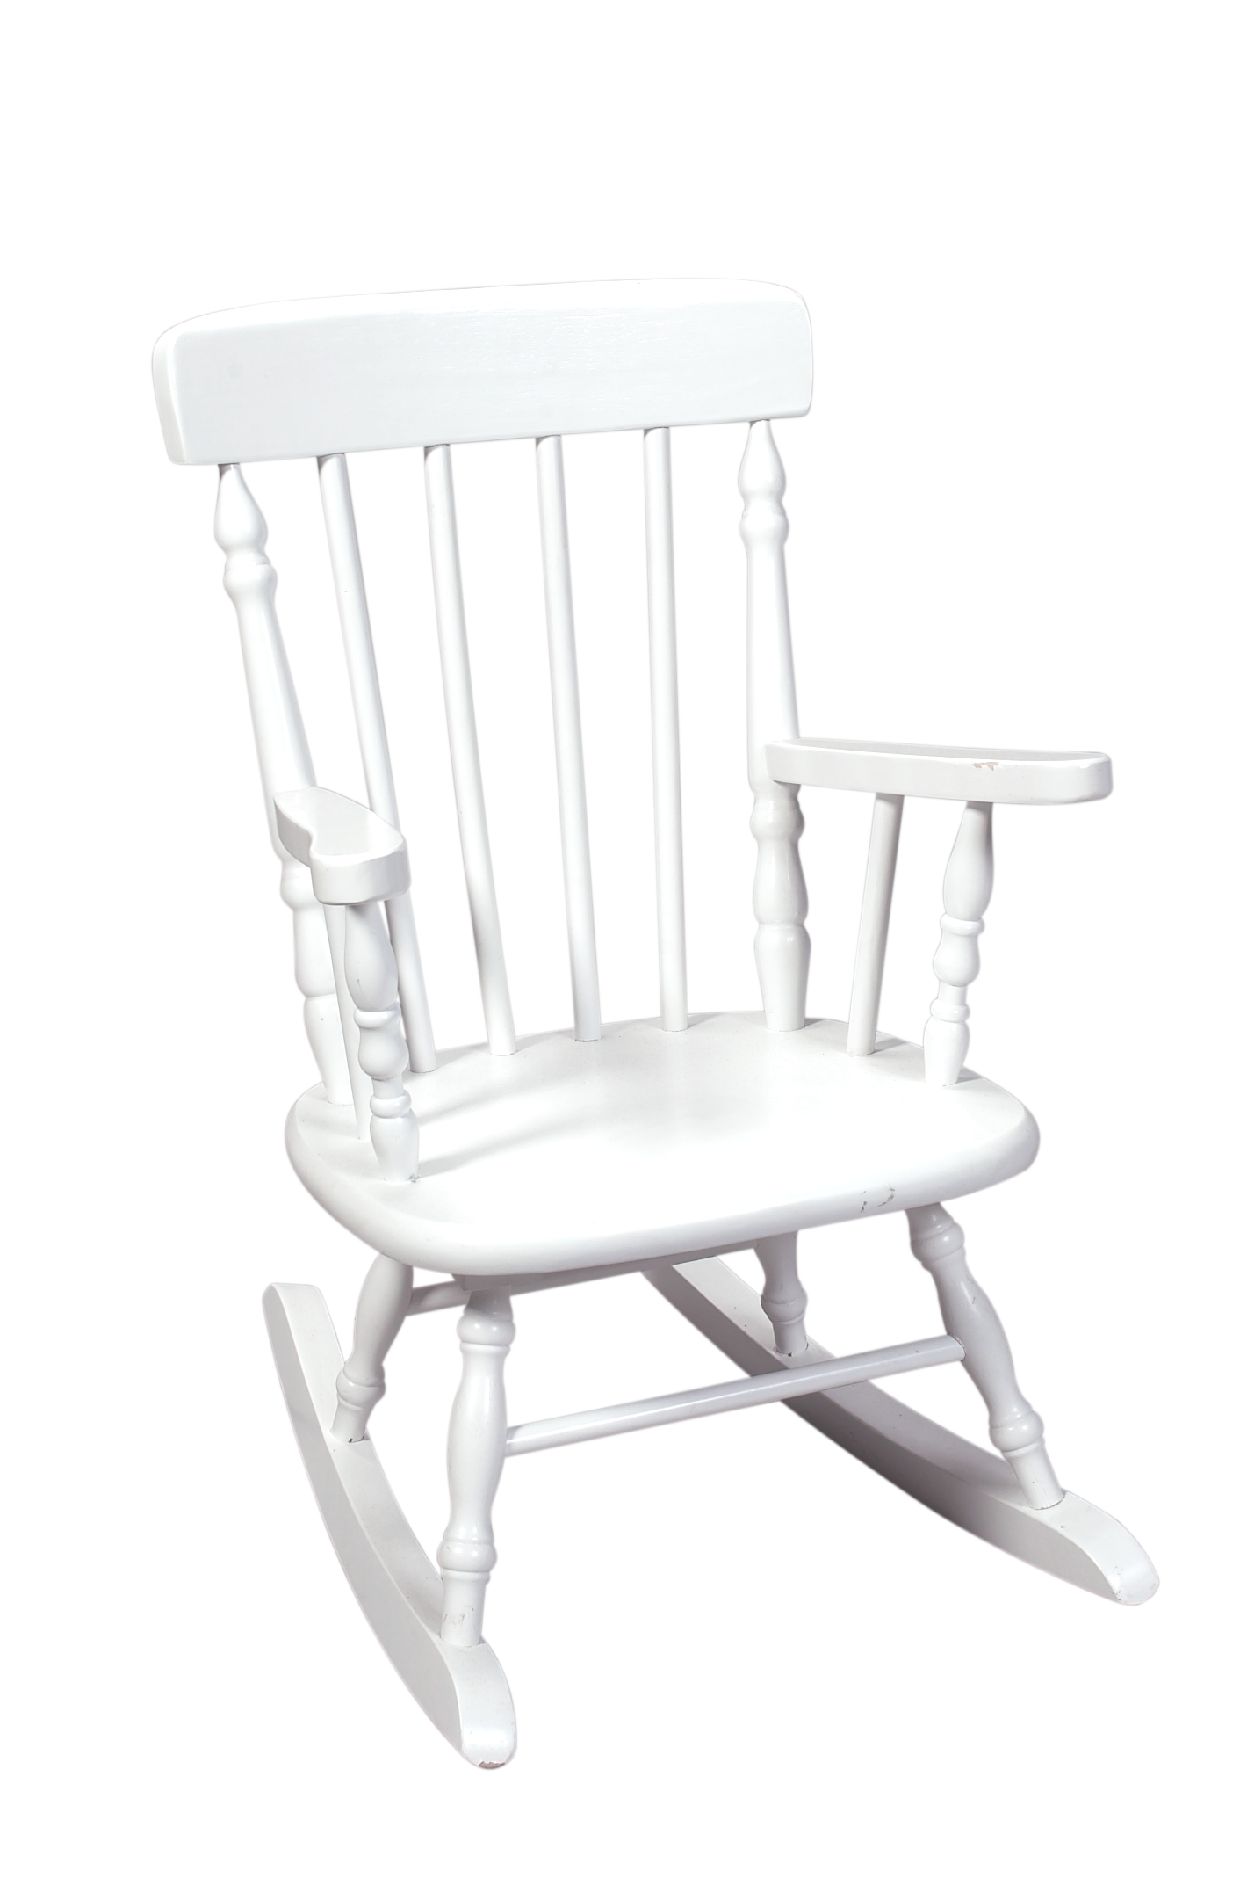 Gift Mark 1410W Deluxe Child's Spindle Rocking Chair in White